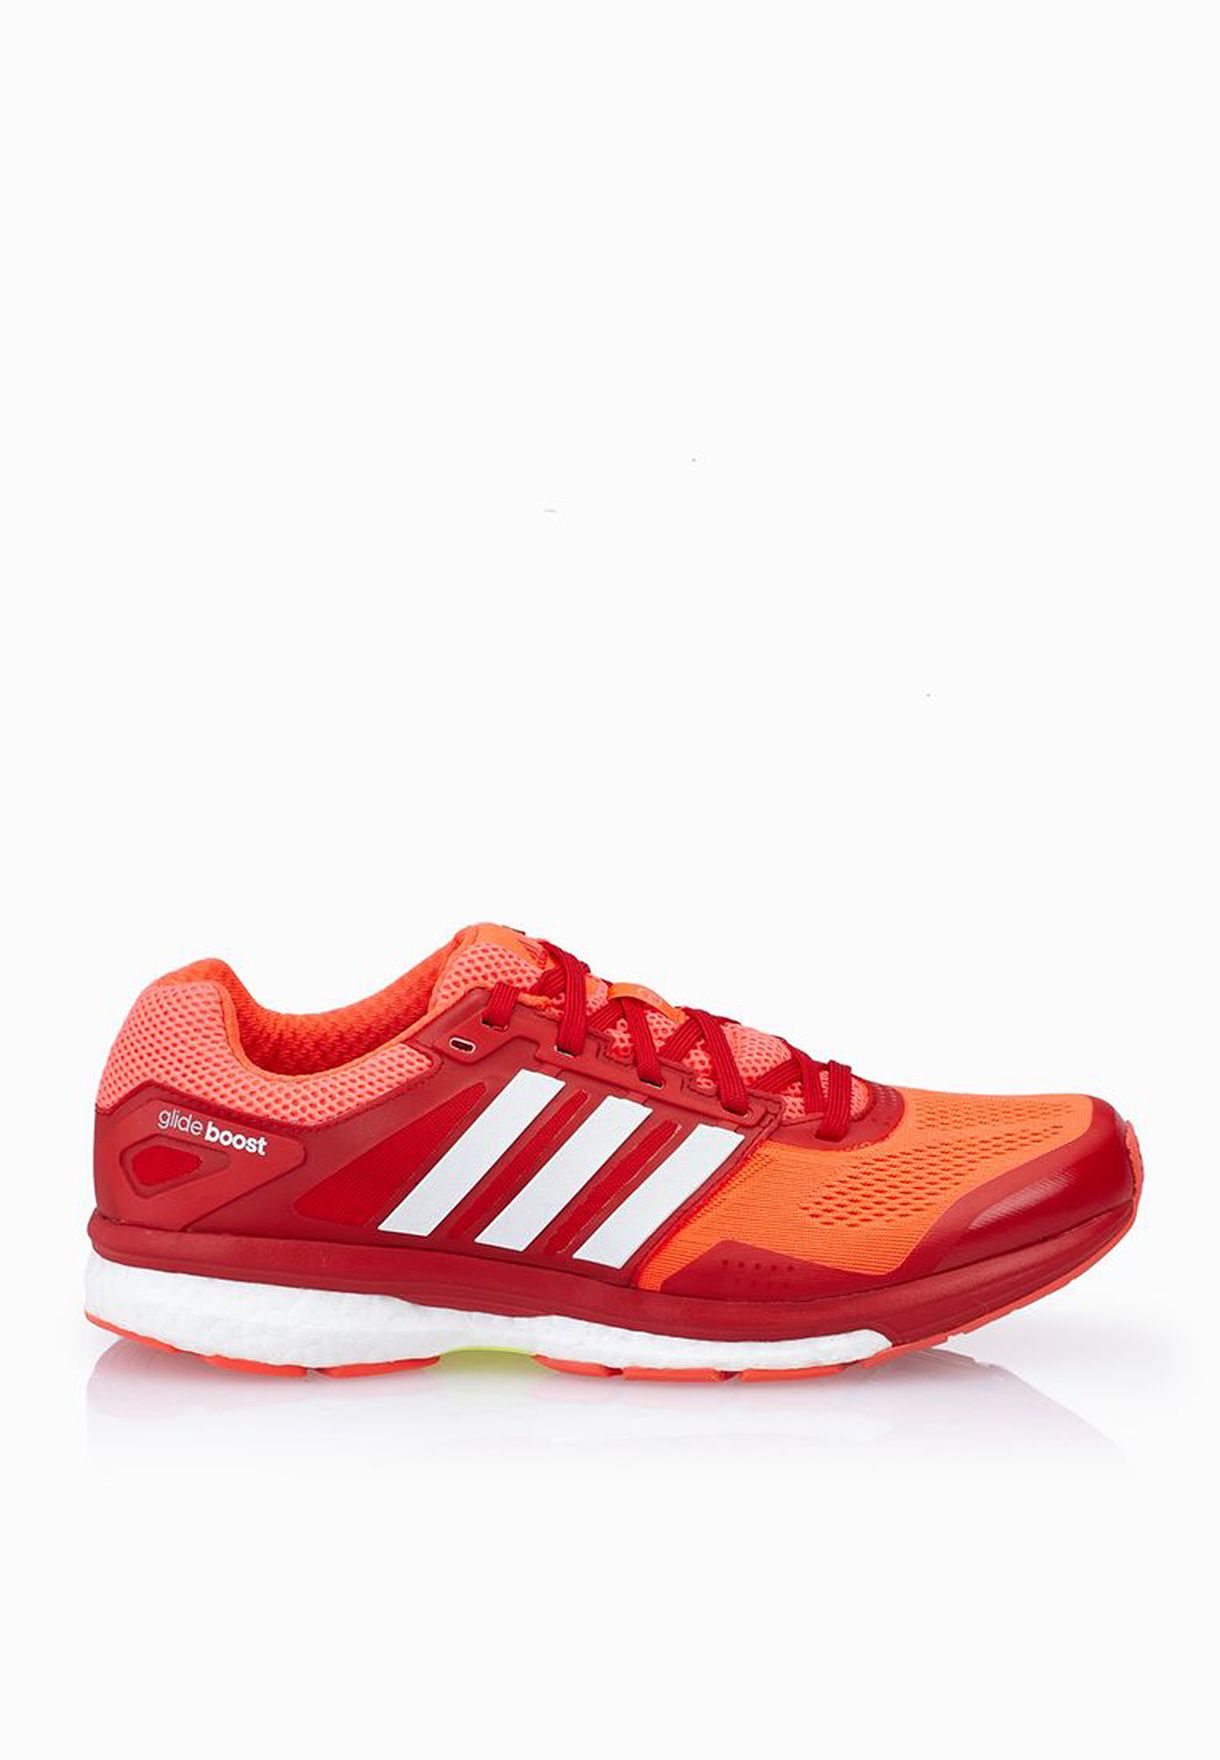 adidas glide boost red